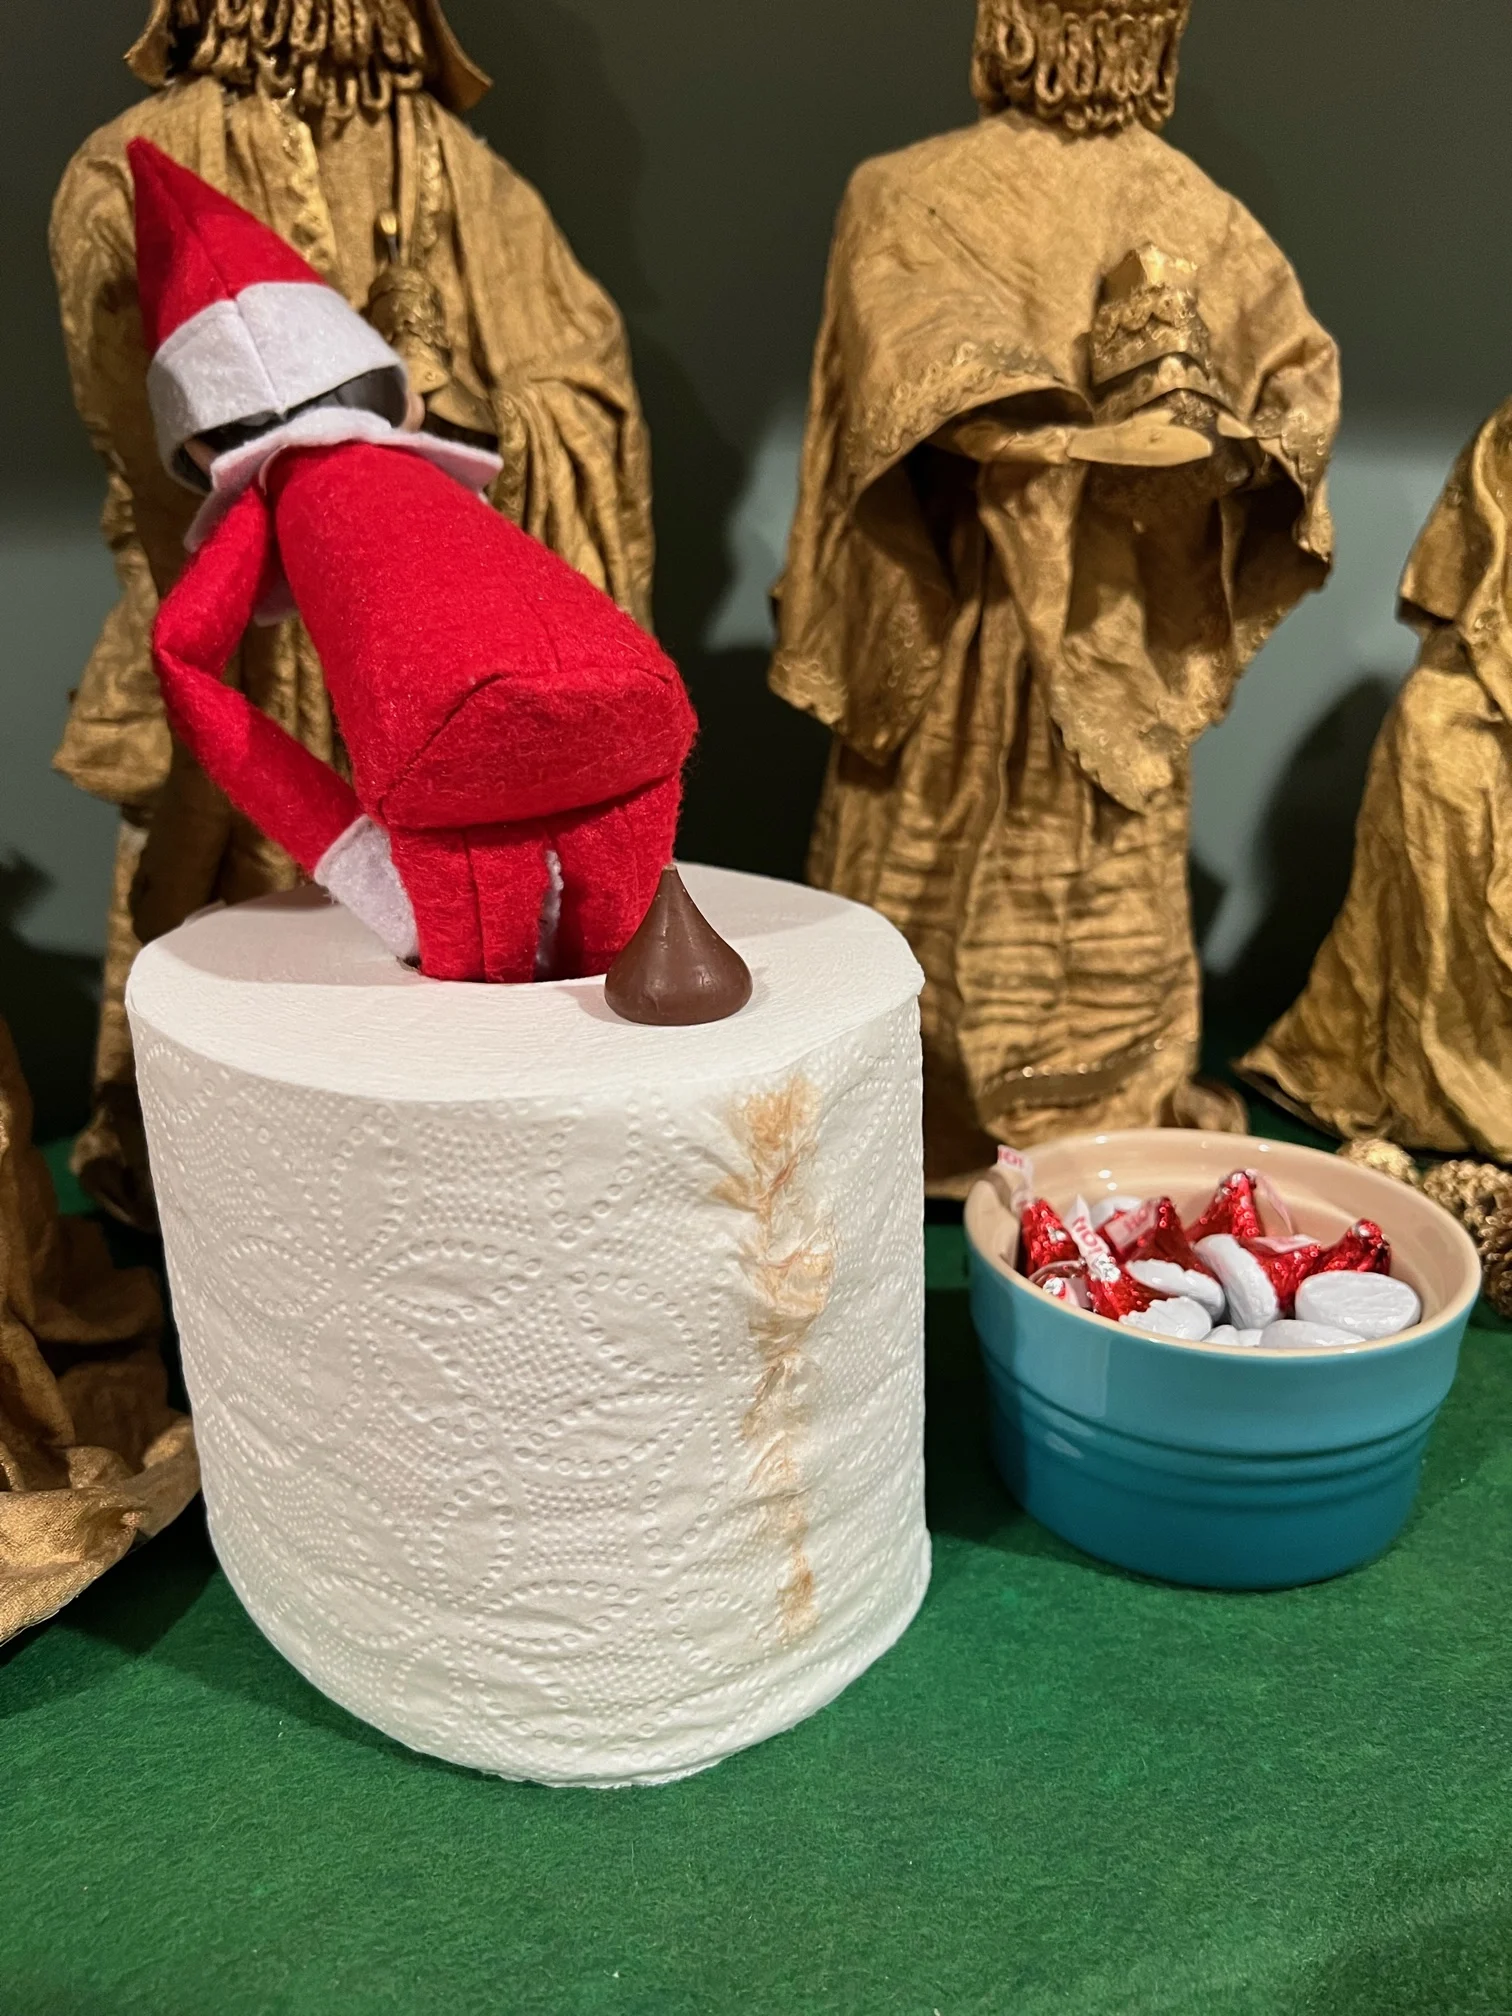 Elf on the shelf idea: pooping - Celebrating with kids